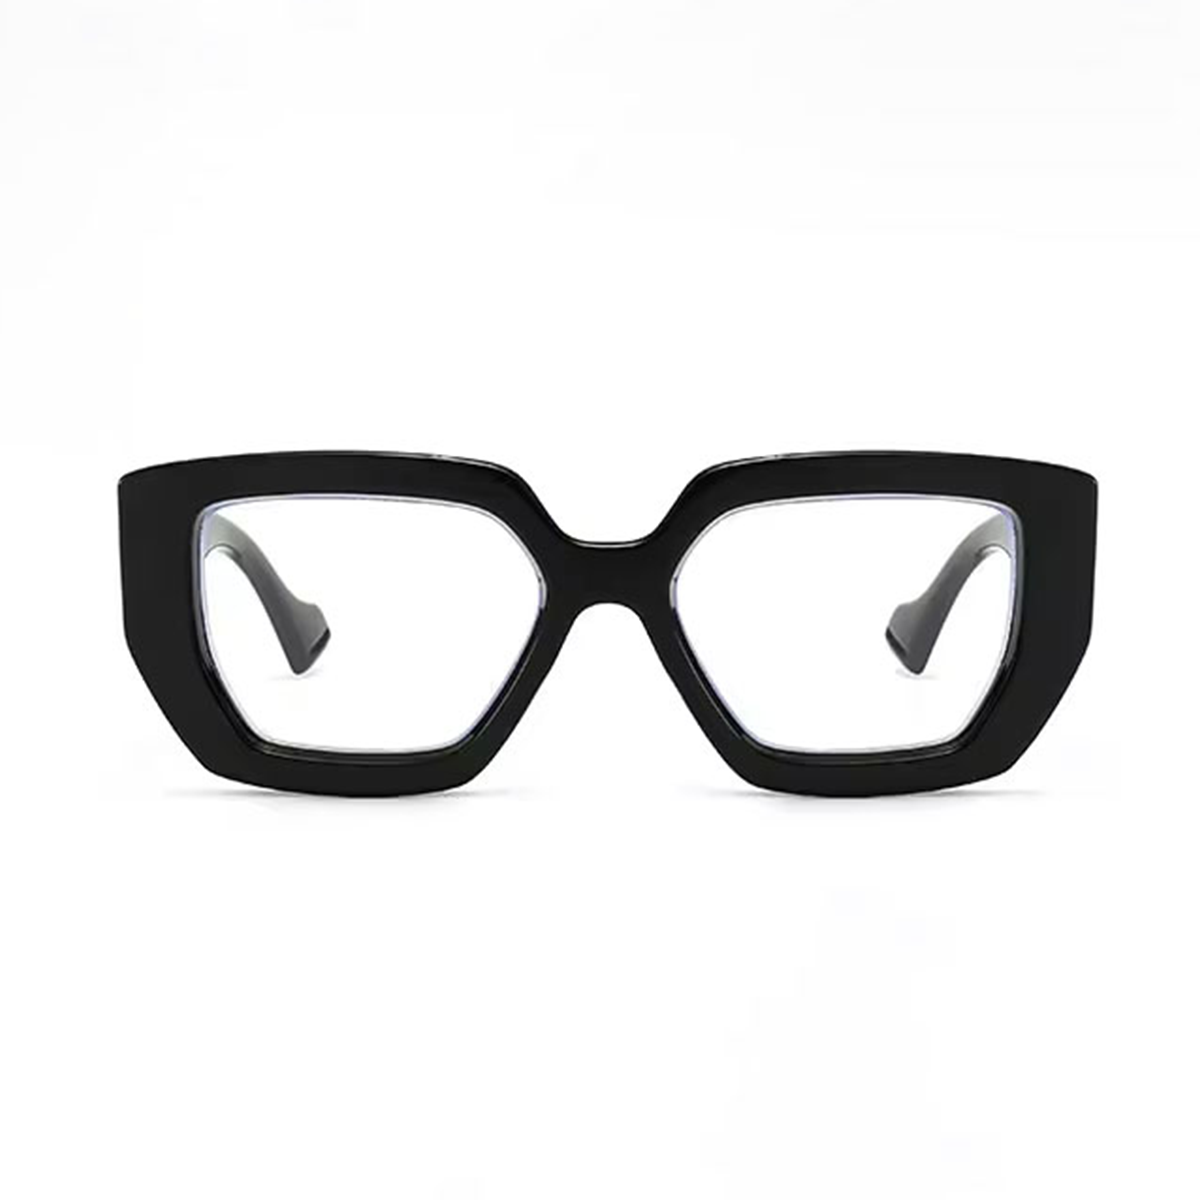 Elevate your style with Mono Eyeglasses by AKA SAVRAN. Crafted with Japanese simplicity and style.